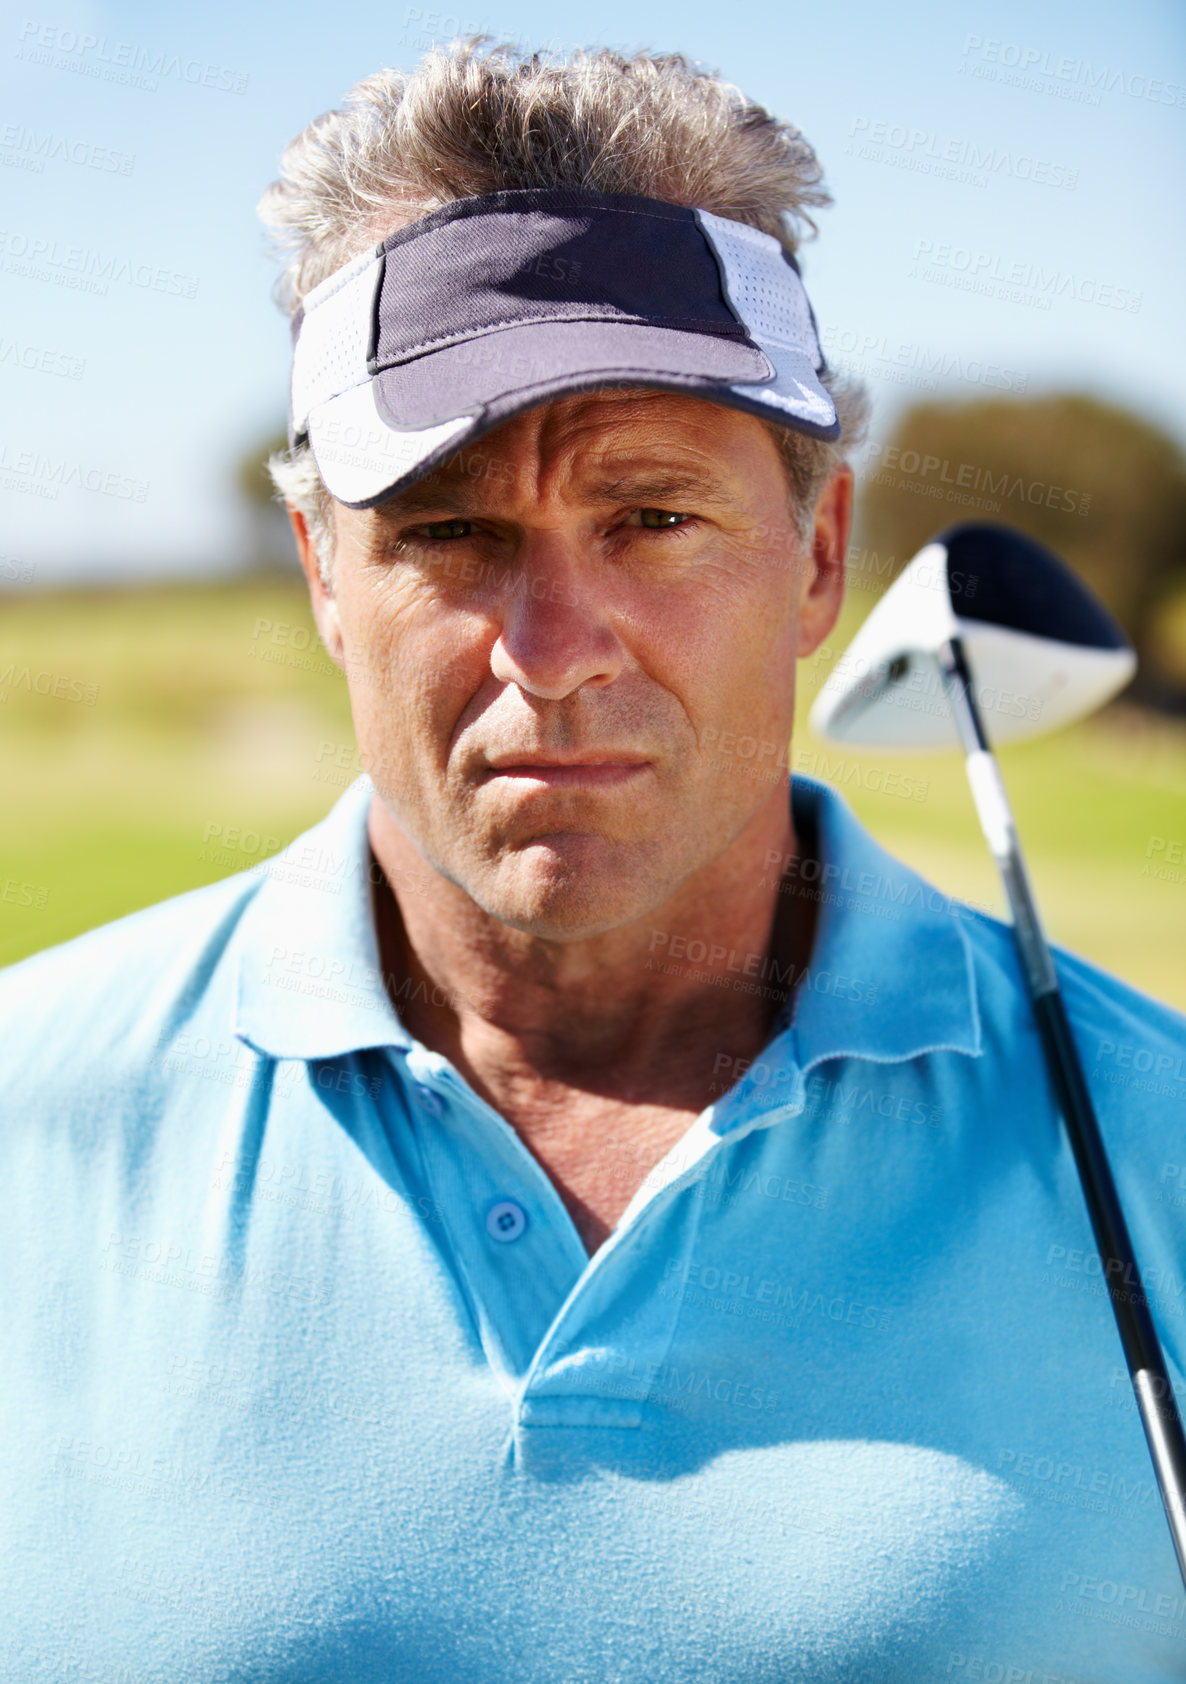 Buy stock photo Head and shoulders portrait of a mature golfer with his club over his shoulder